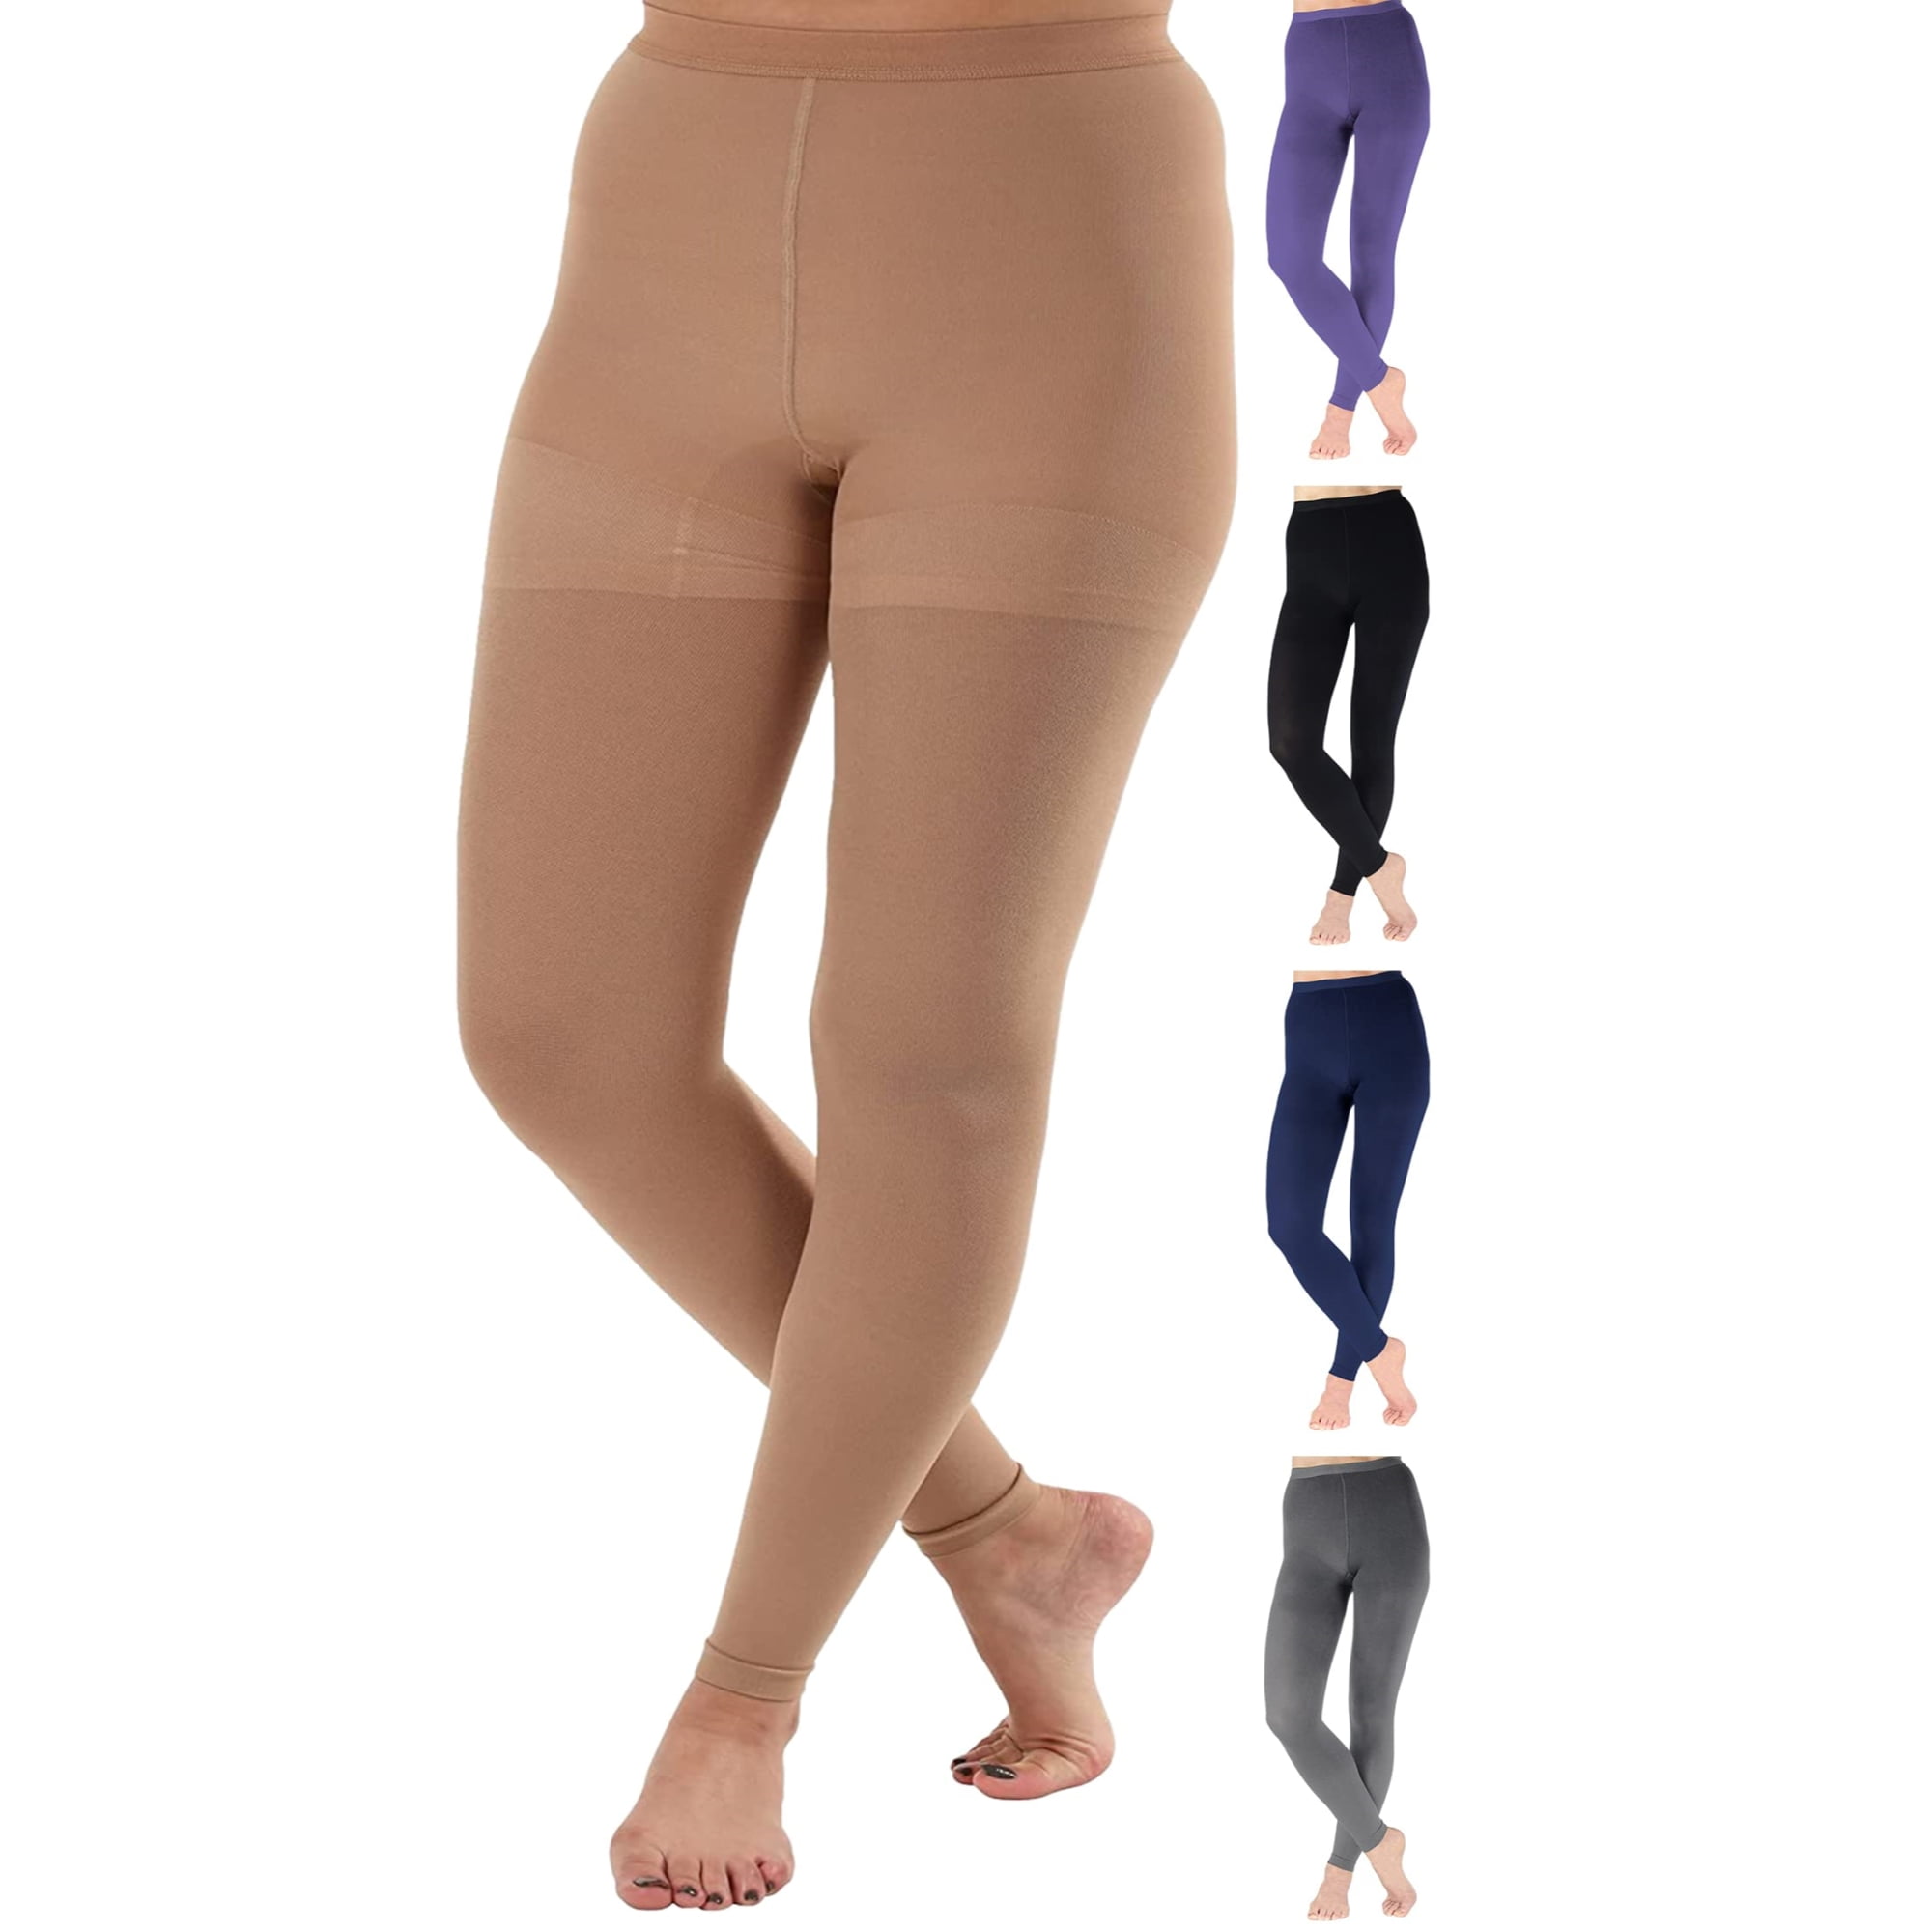 3XL Plus Size Womens Footless Compression Tights 20-30mmHg - Beige,  3X-Large 